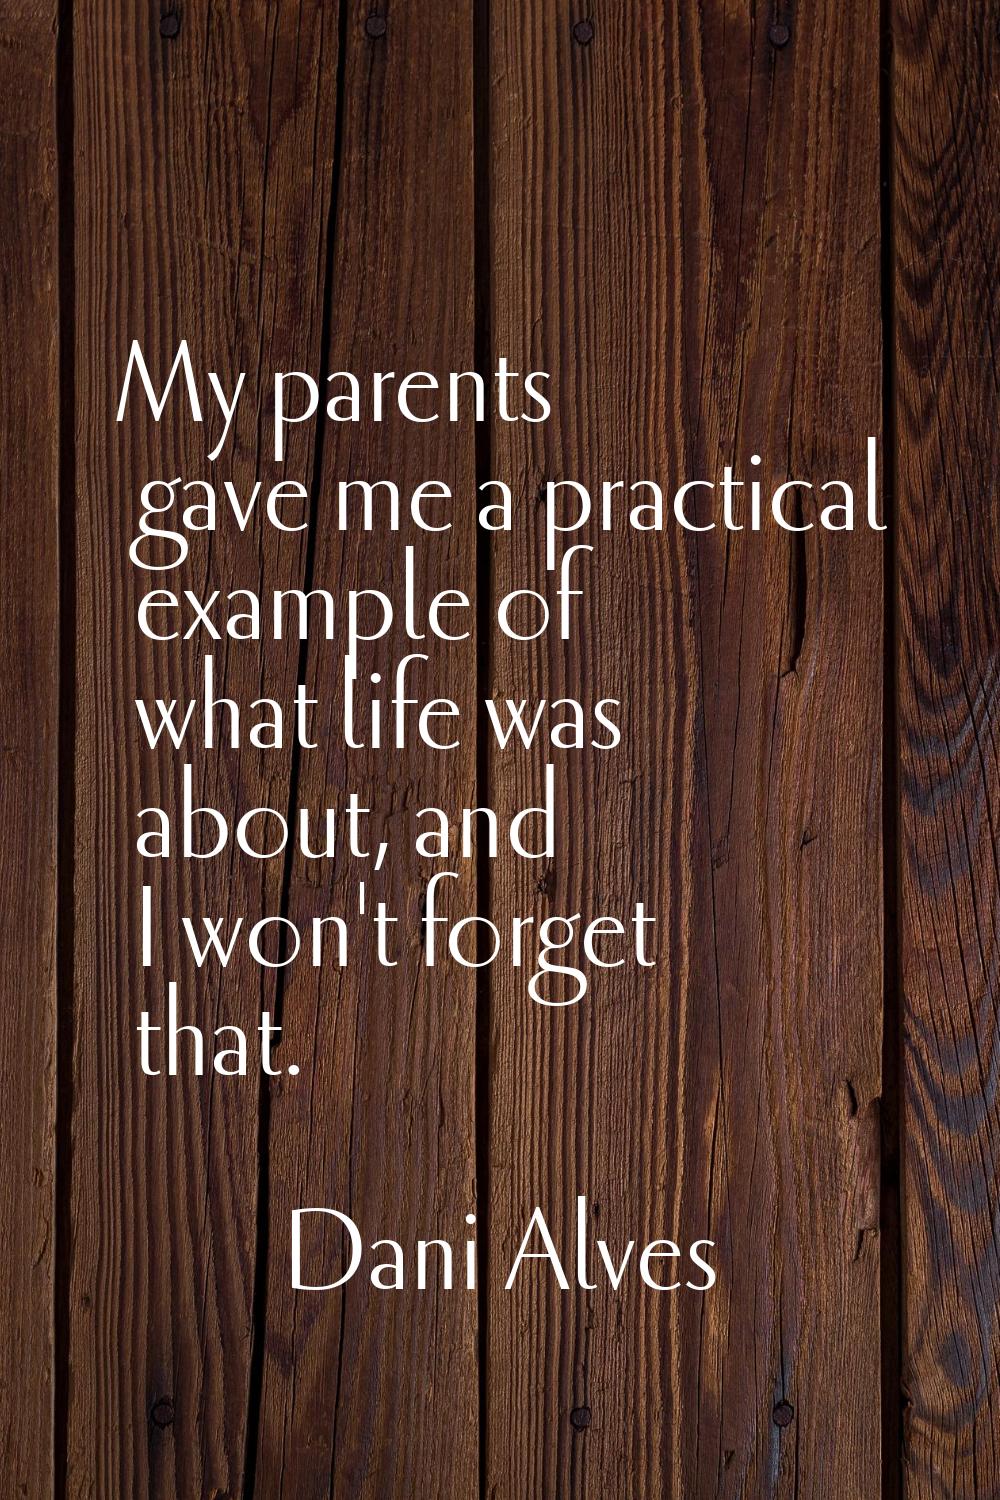 My parents gave me a practical example of what life was about, and I won't forget that.